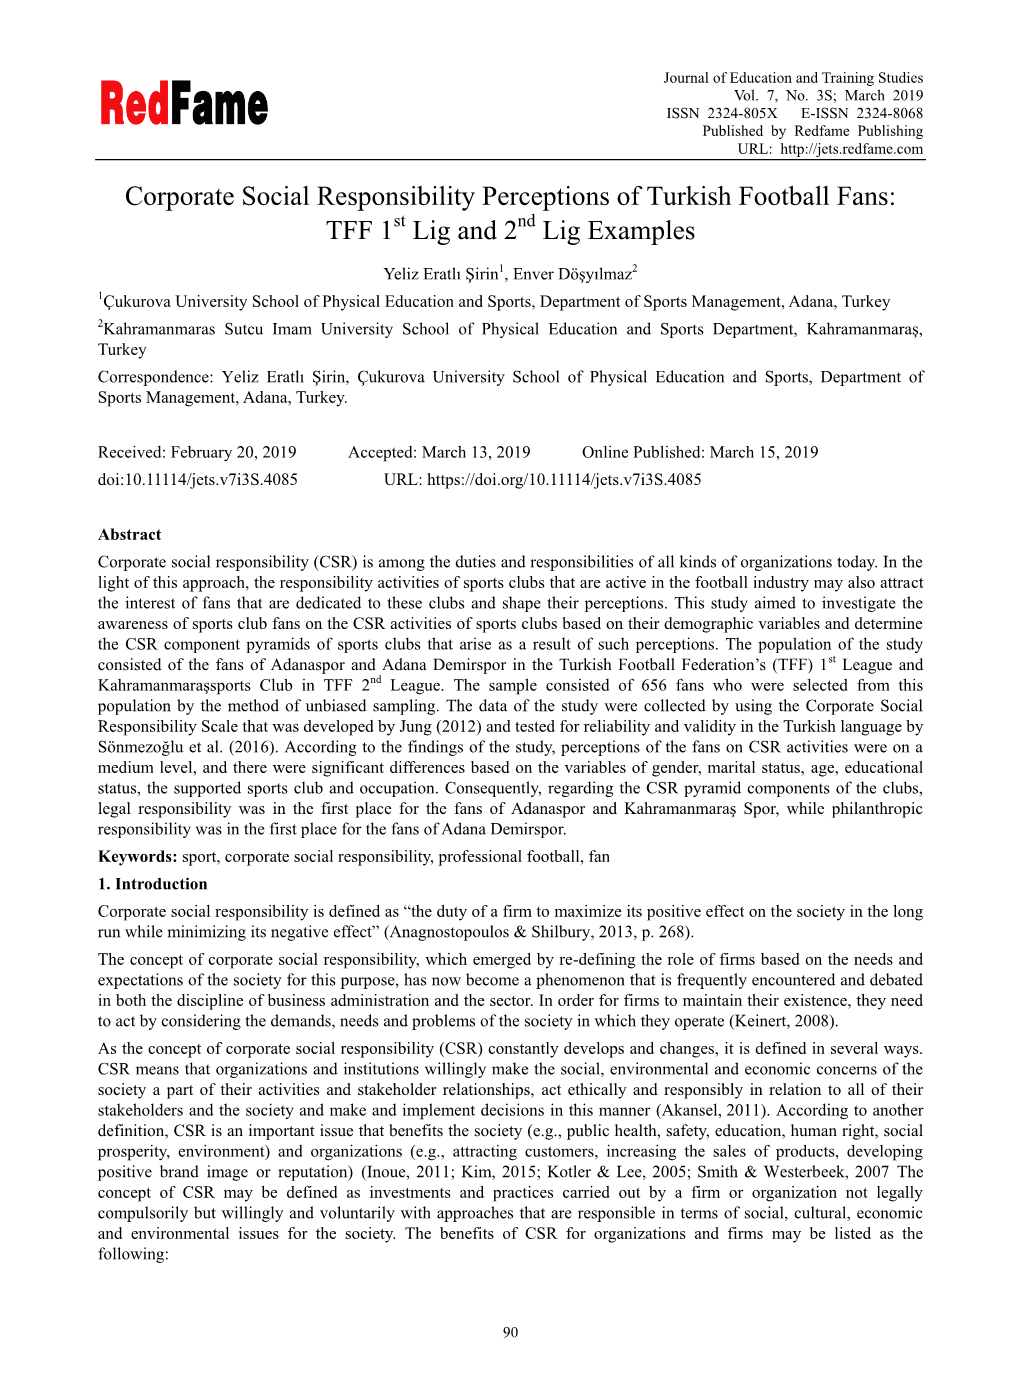 Corporate Social Responsibility Perceptions of Turkish Football Fans: TFF 1St Lig and 2Nd Lig Examples